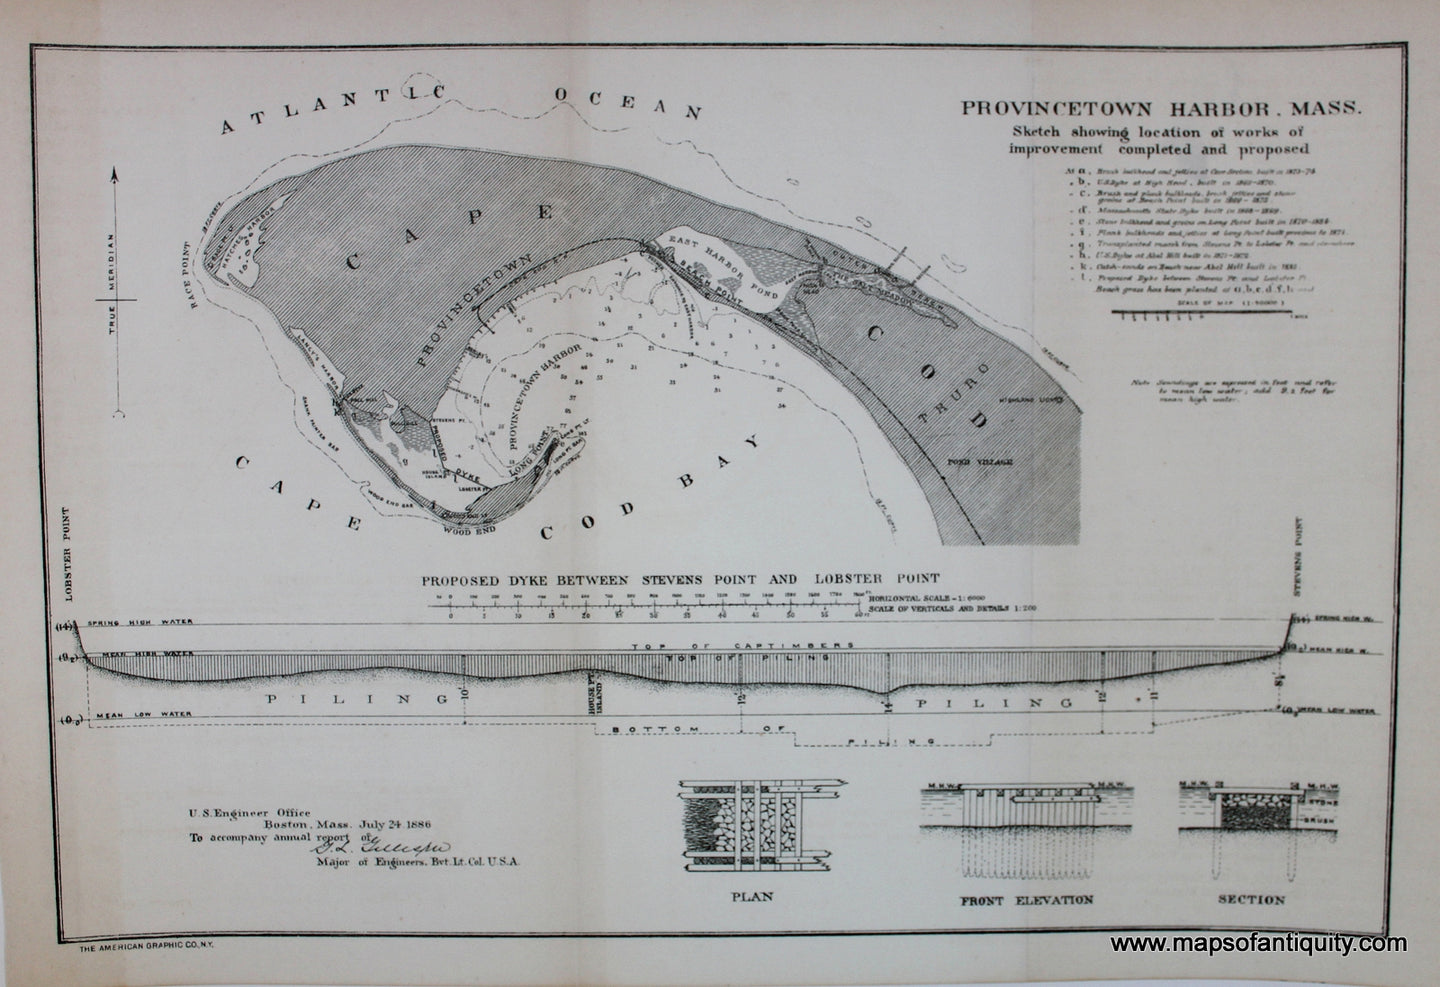 Reproduction-Provincetown-Harbor-Massachusetts-Proposed-Dyke-between-Stevens-Point-and-Lobster-Point---Reproduction---Reproductions-Cape-Cod-and-Islands-Reproduction--Maps-Of-Antiquity